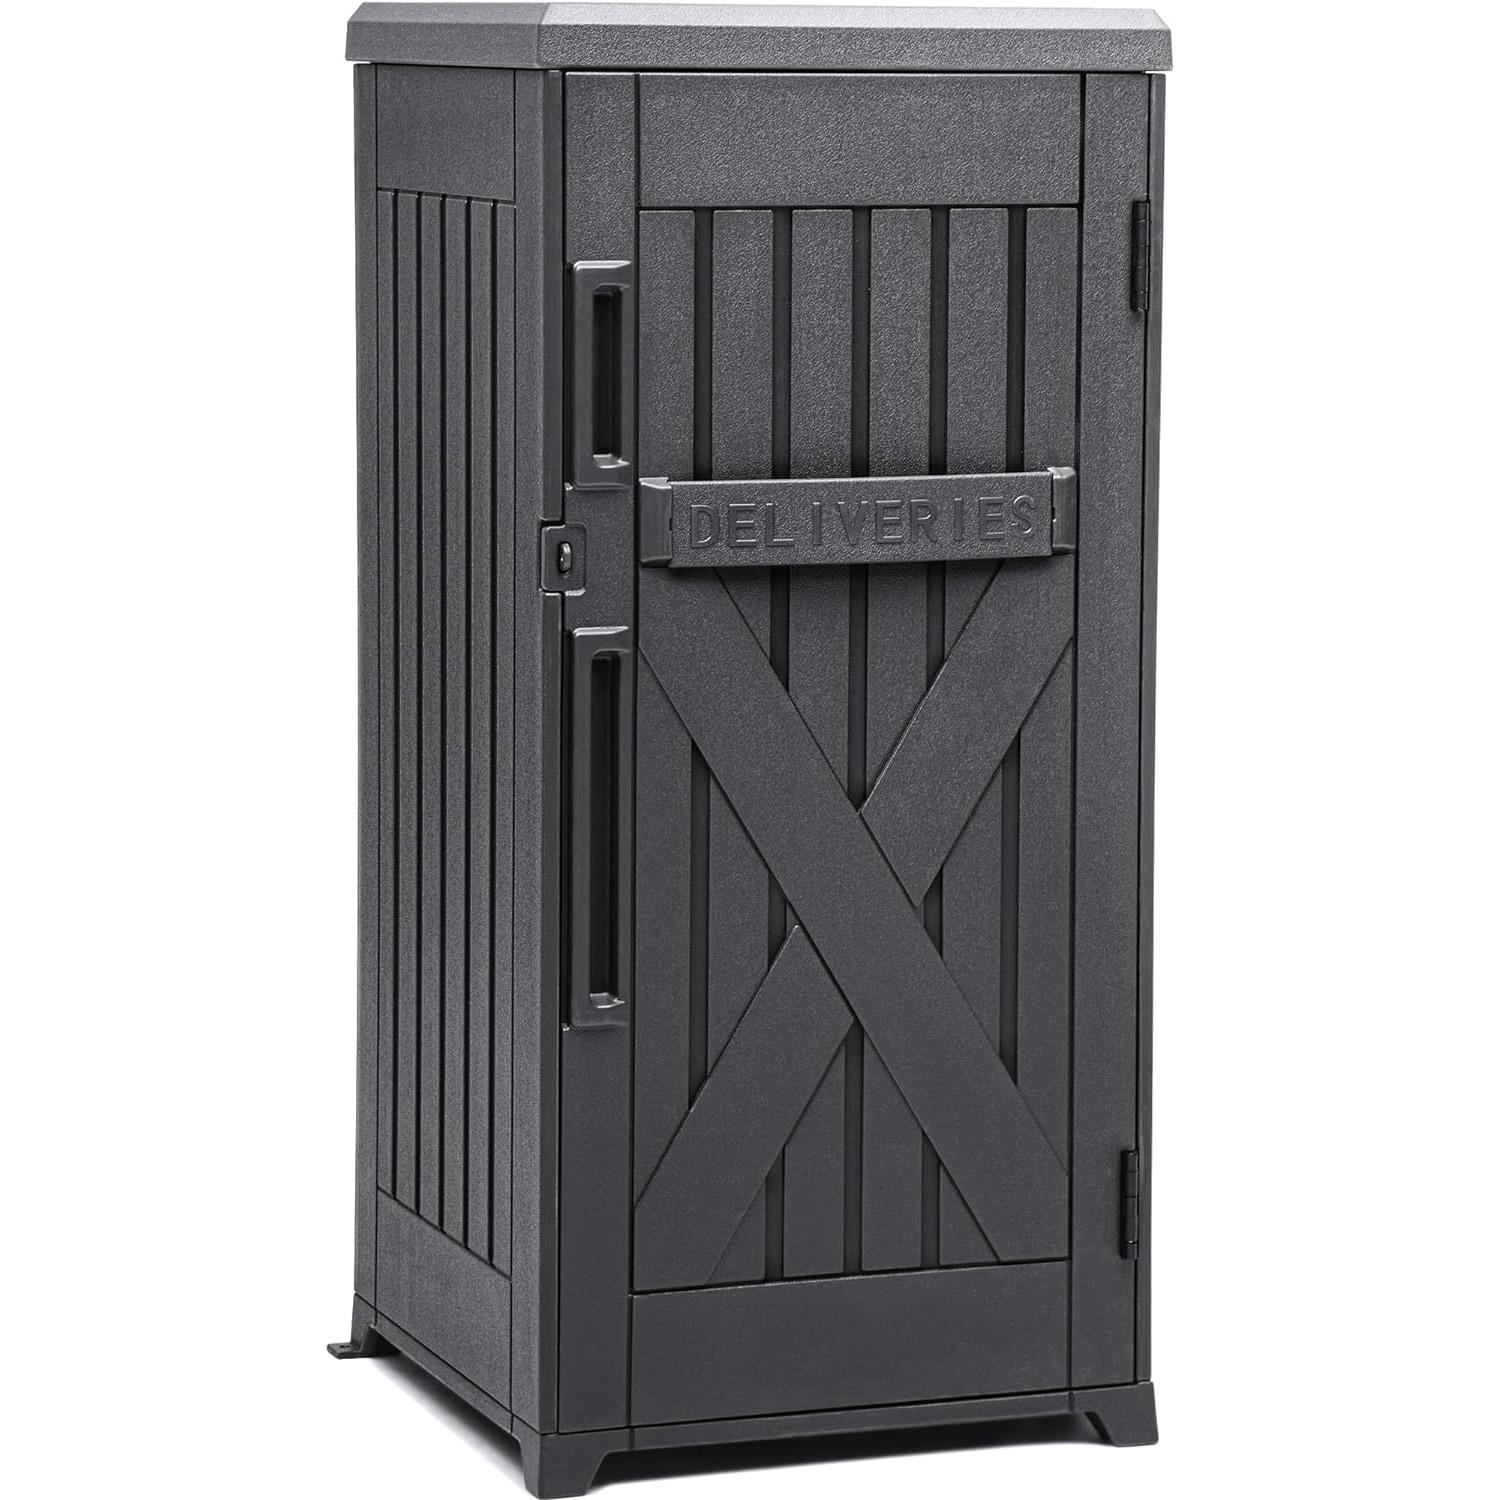 Yitahome 60-Gal Lockable Package Delivery Storage Box for $67.49 Shipped